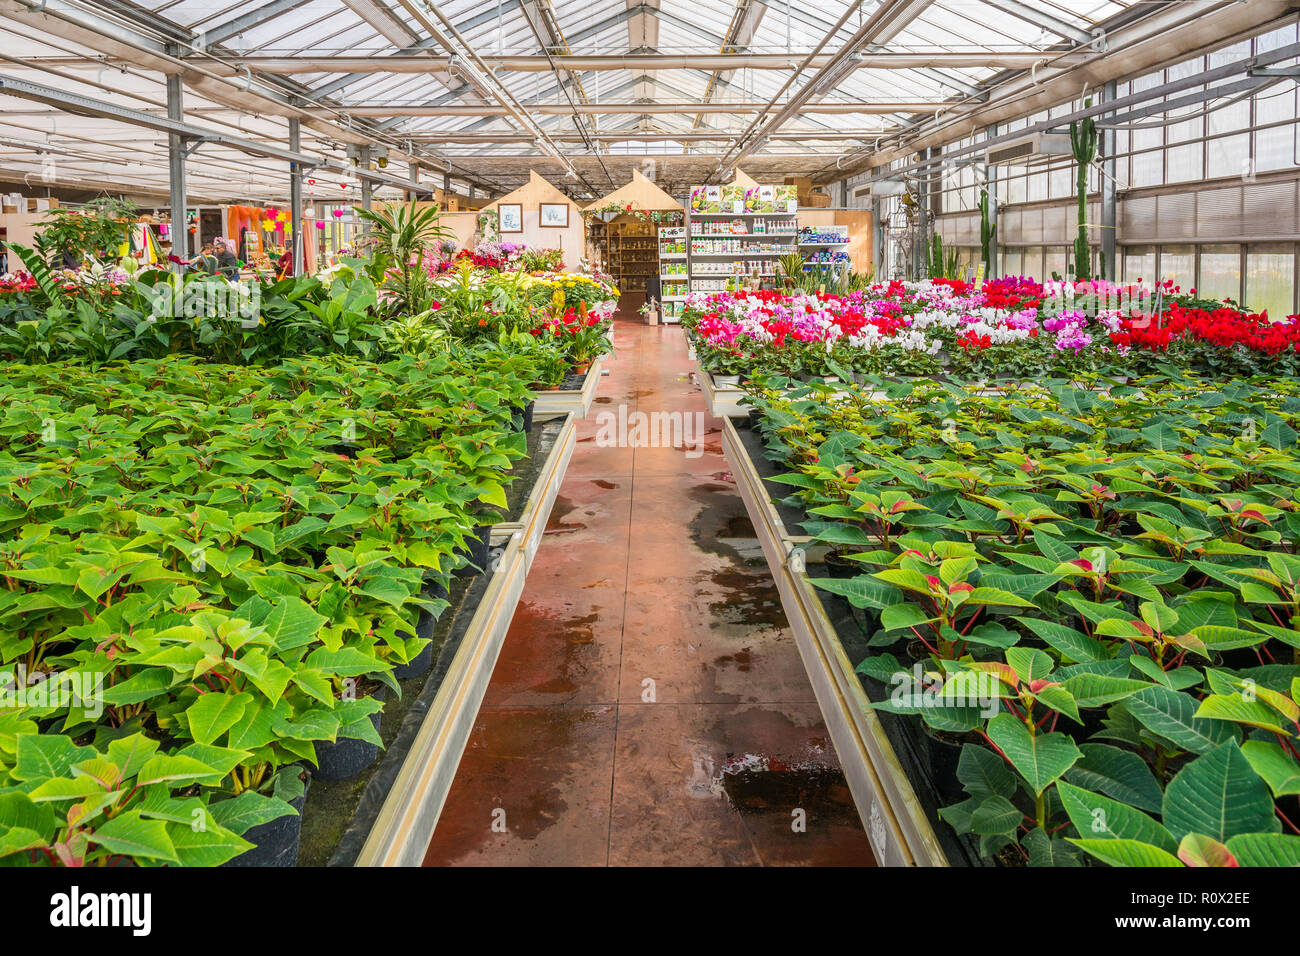 interior of an large greenhouse with blossoming seasonal flowers and plants nursery. Flowers and plants for sale. Trento, northern Italy, Europe Stock Photo